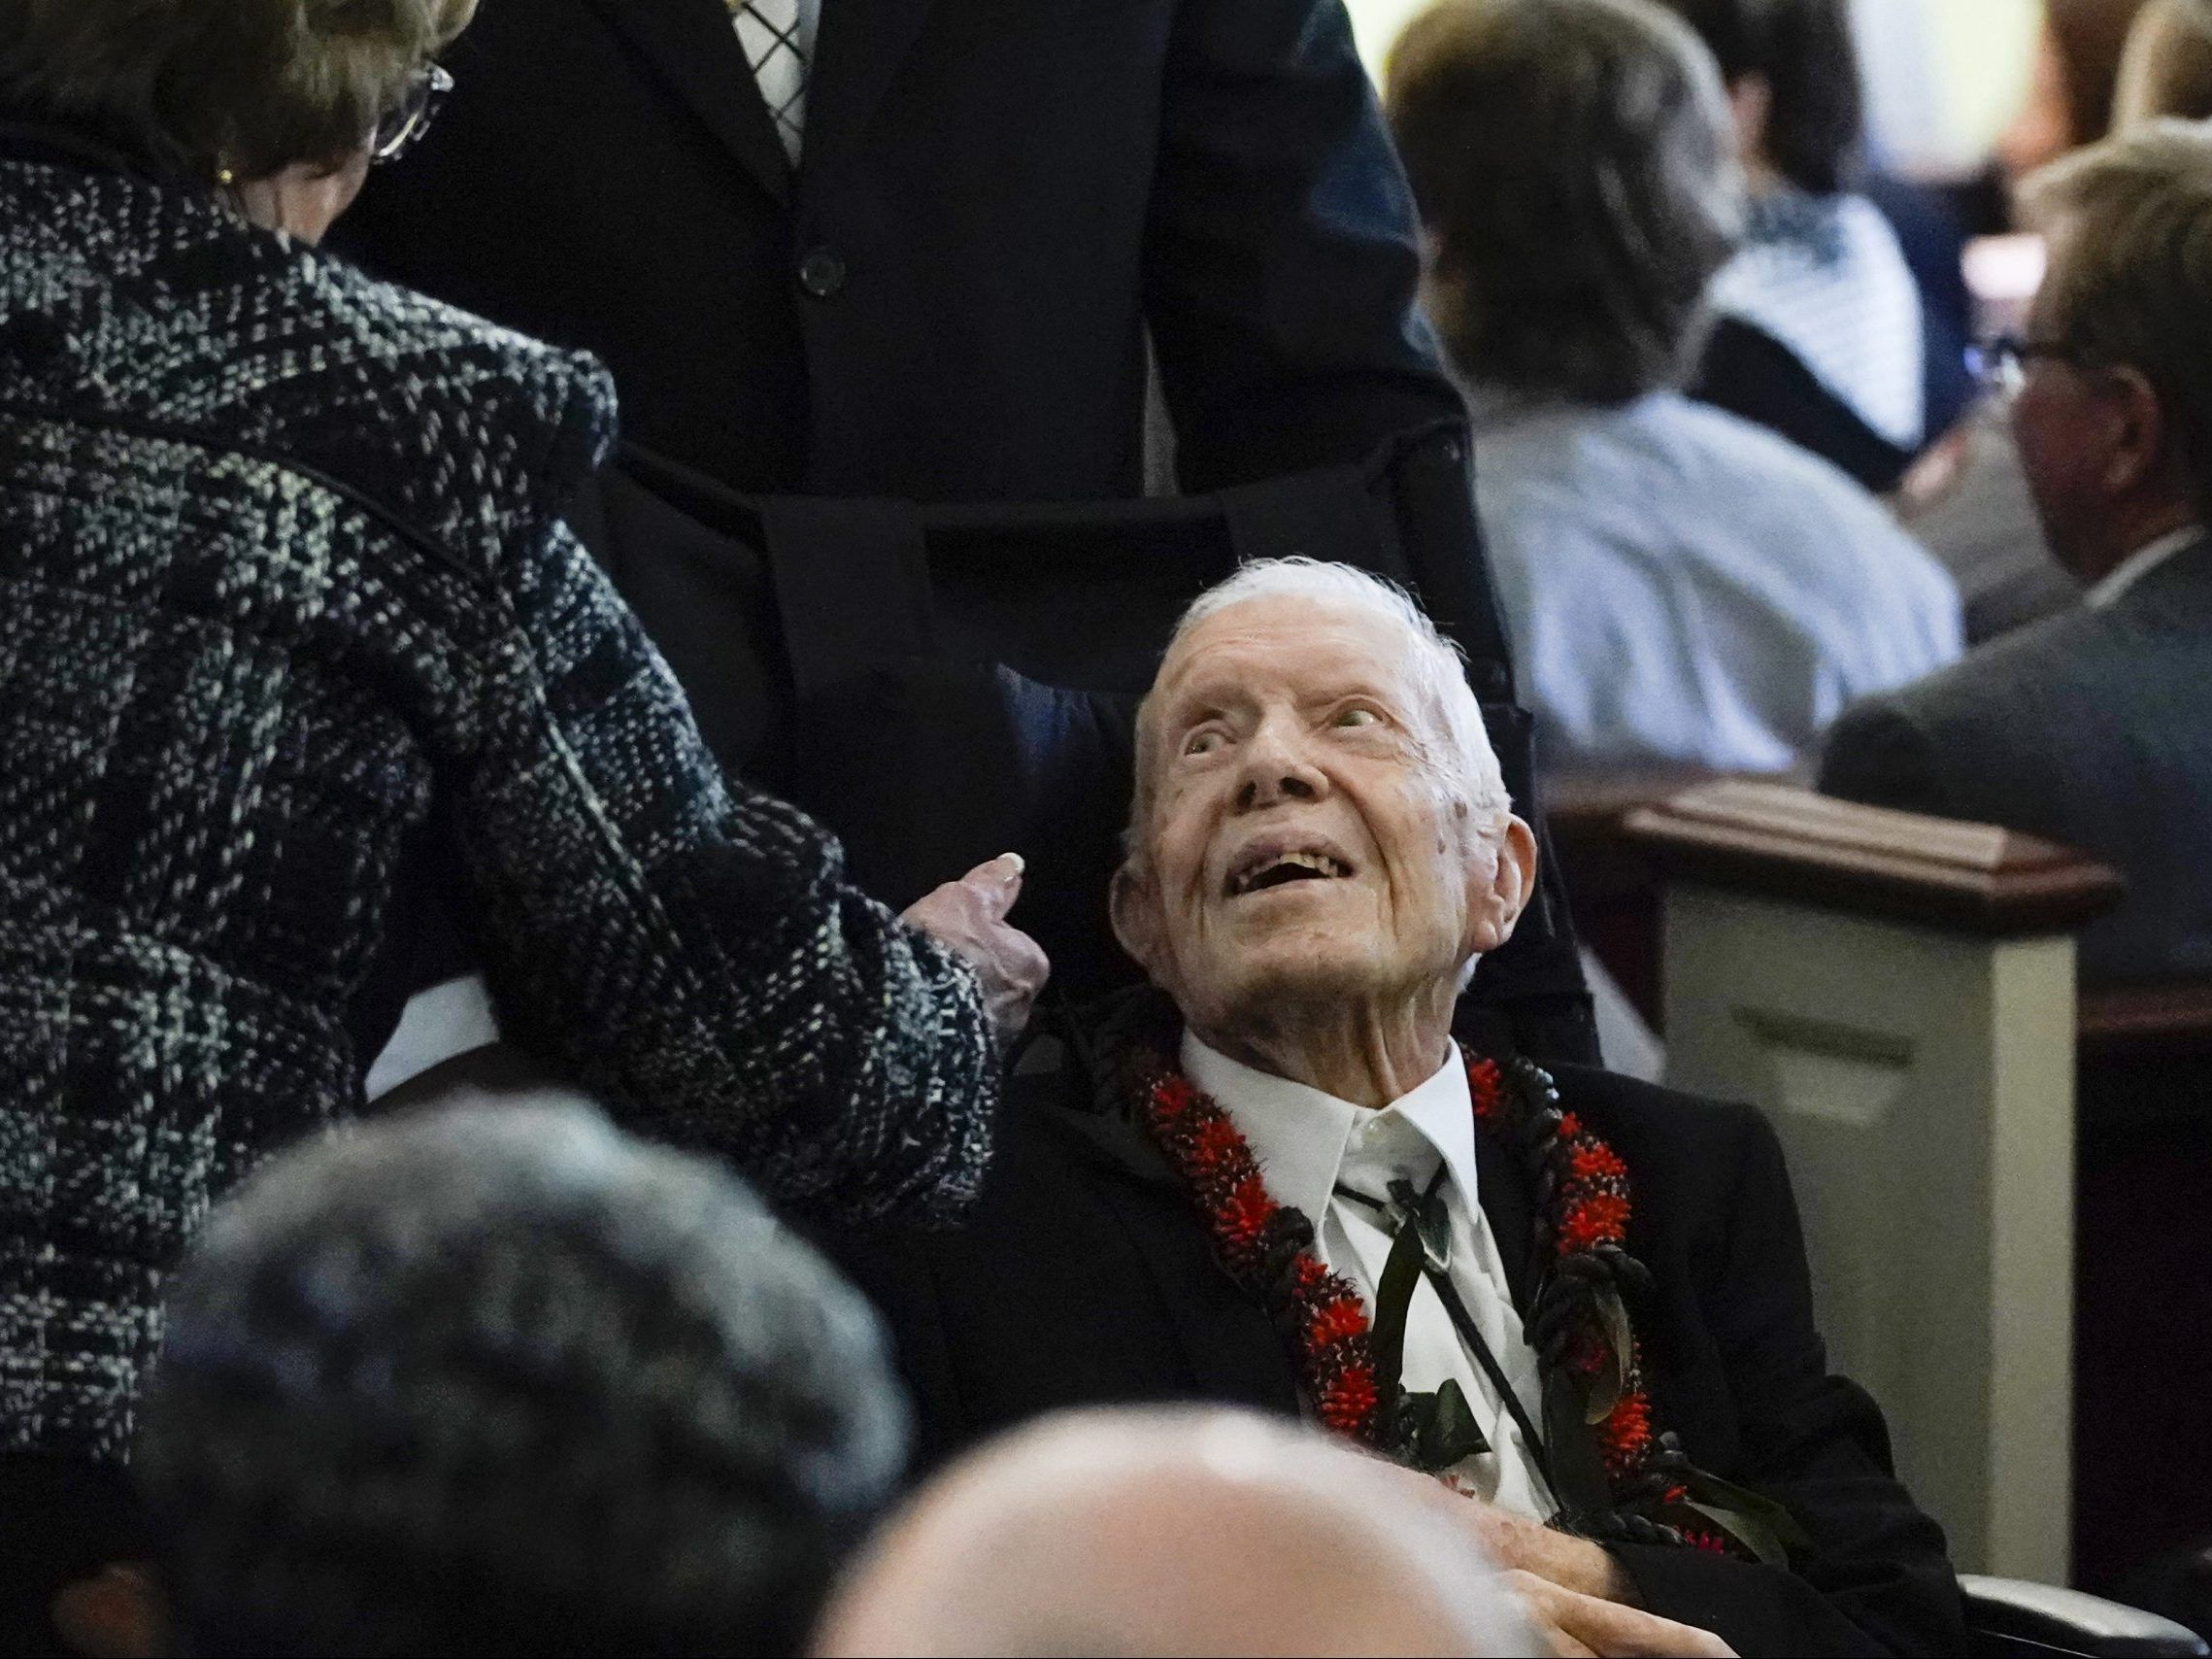 Rosalynn Carter is eulogized before family and friends as husband